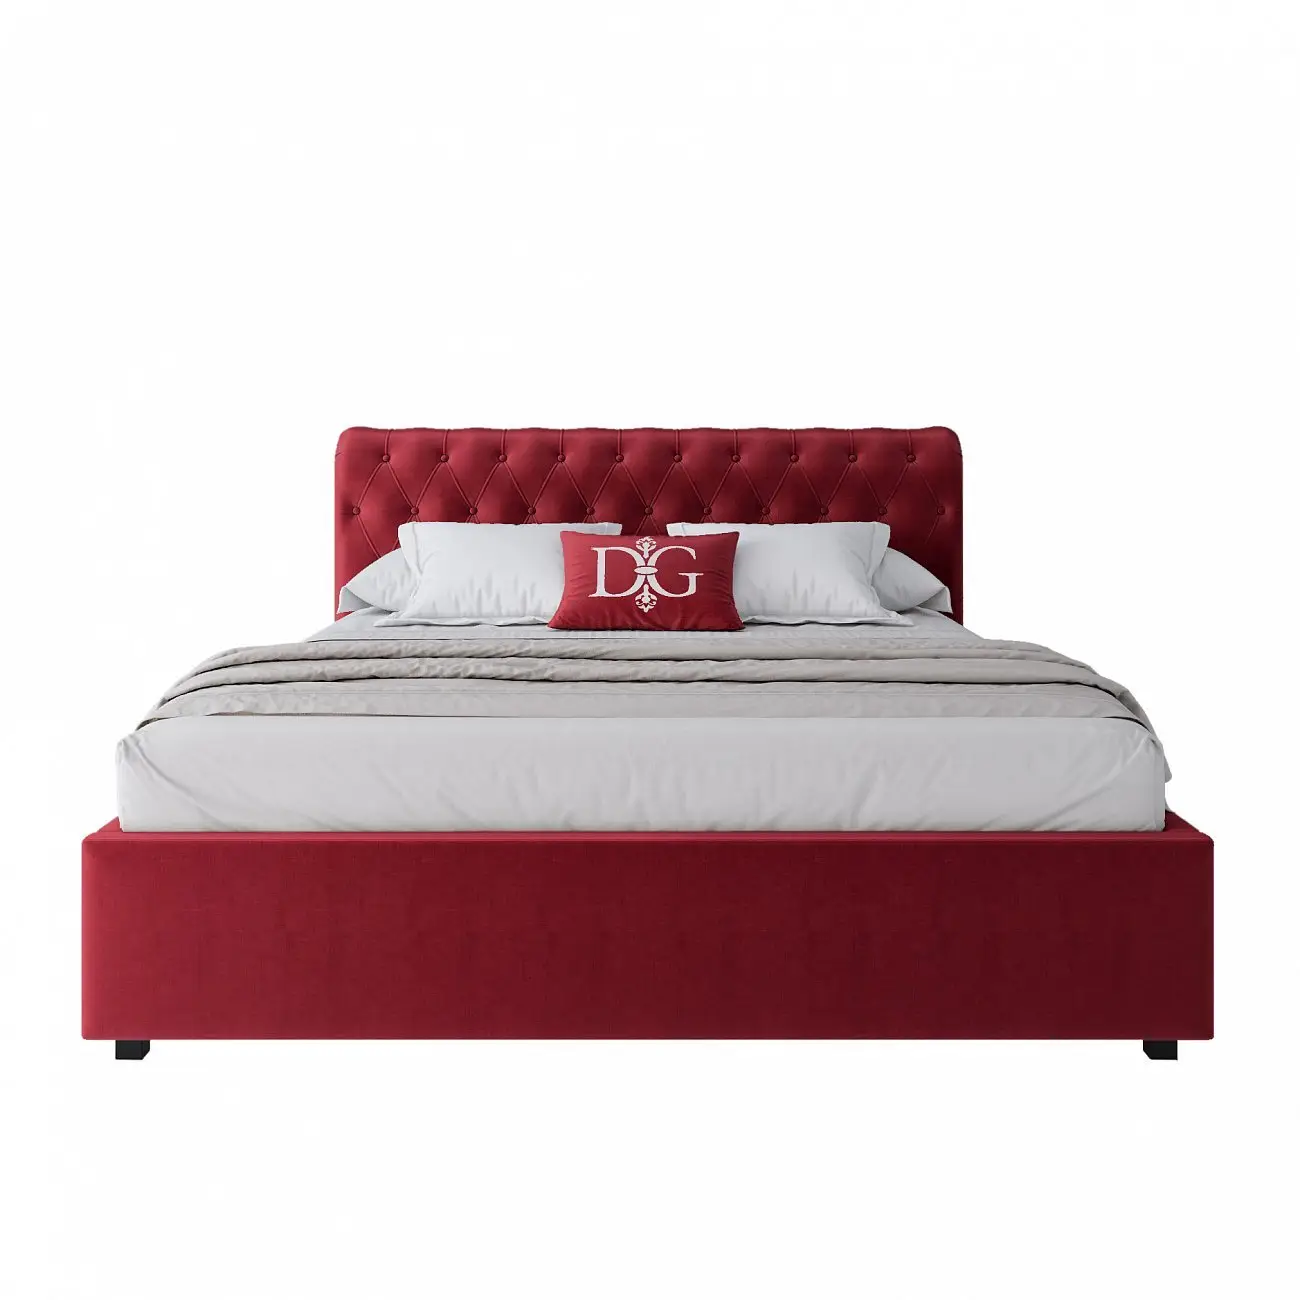 Double bed with upholstered headboard 160x200 cm red Sweet Dreams